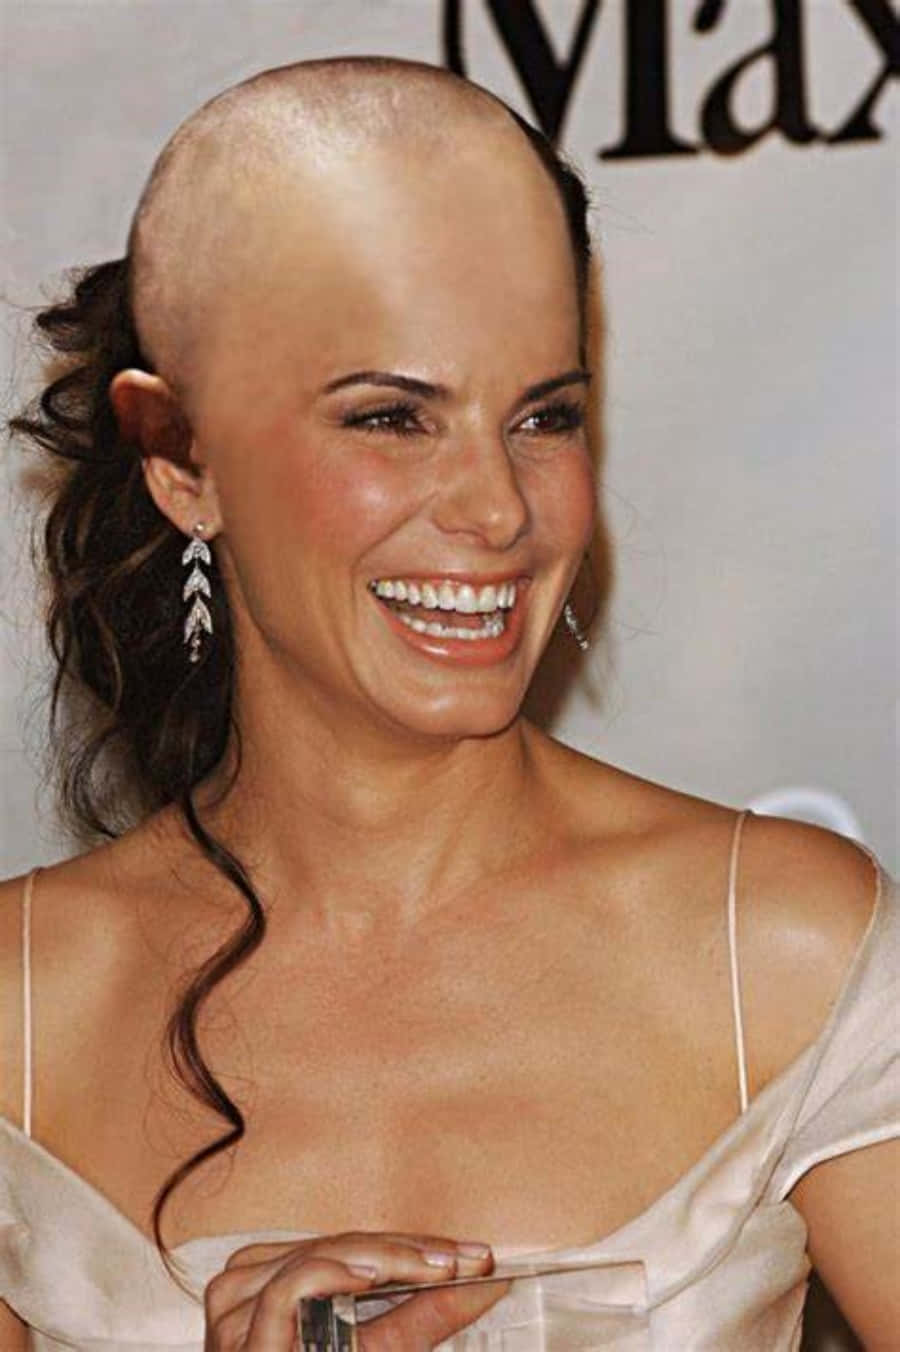 Bald Woman Funny Celebrity Pictures